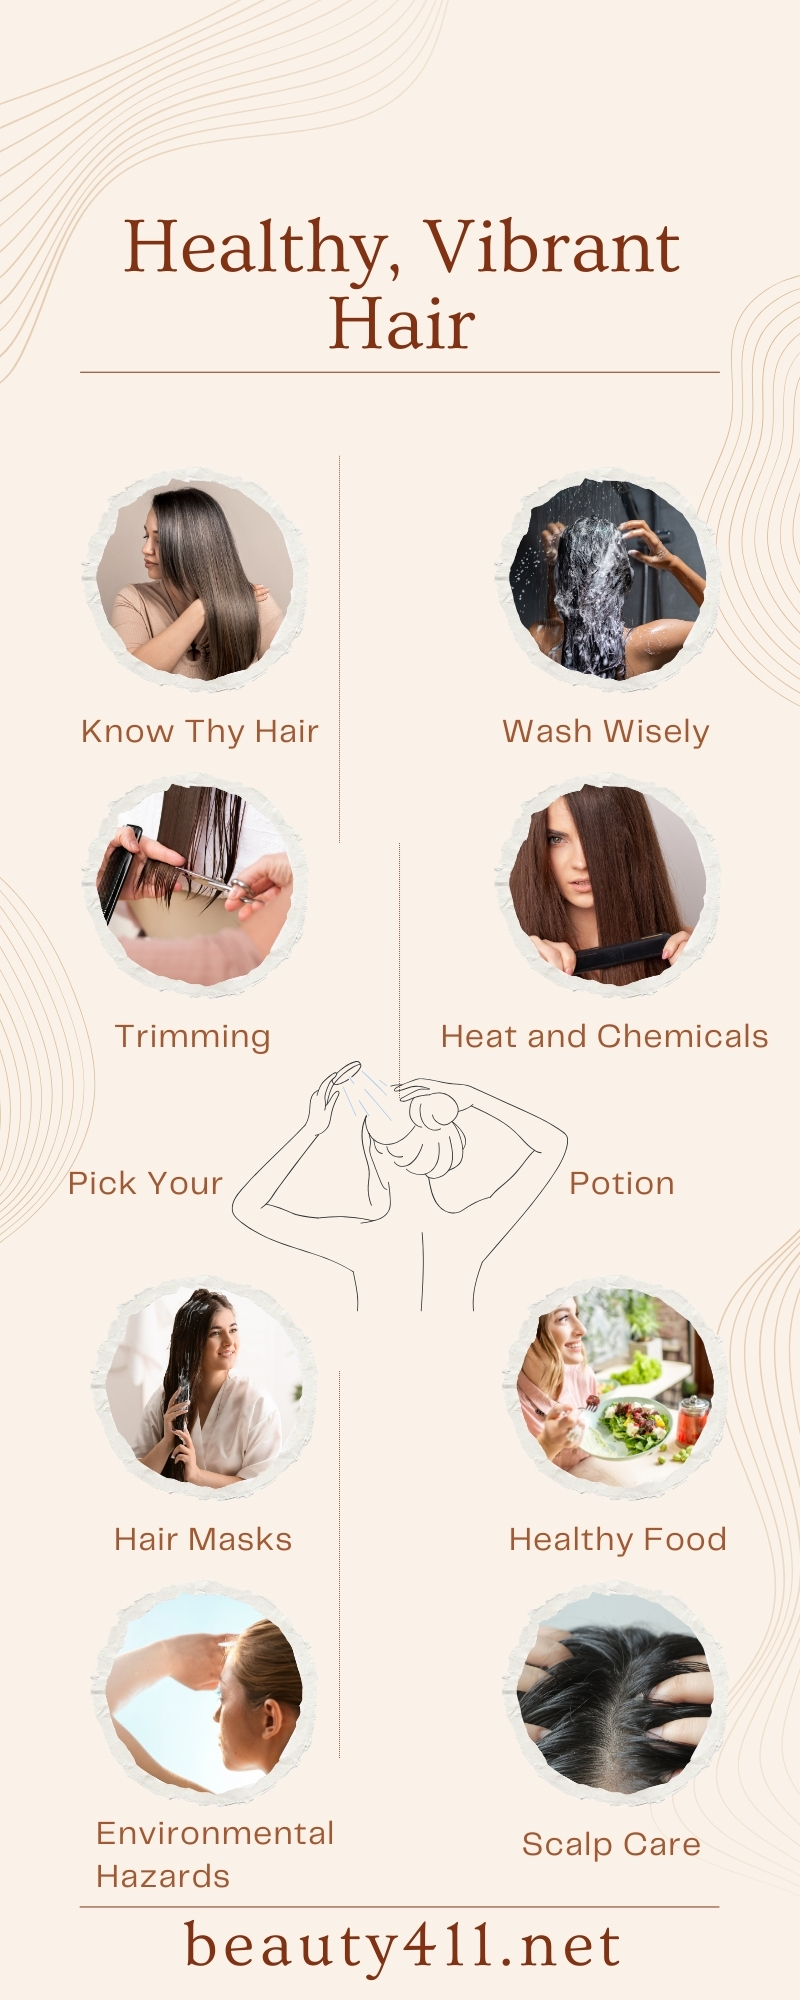 Healthy, Vibrant Hair Infographic